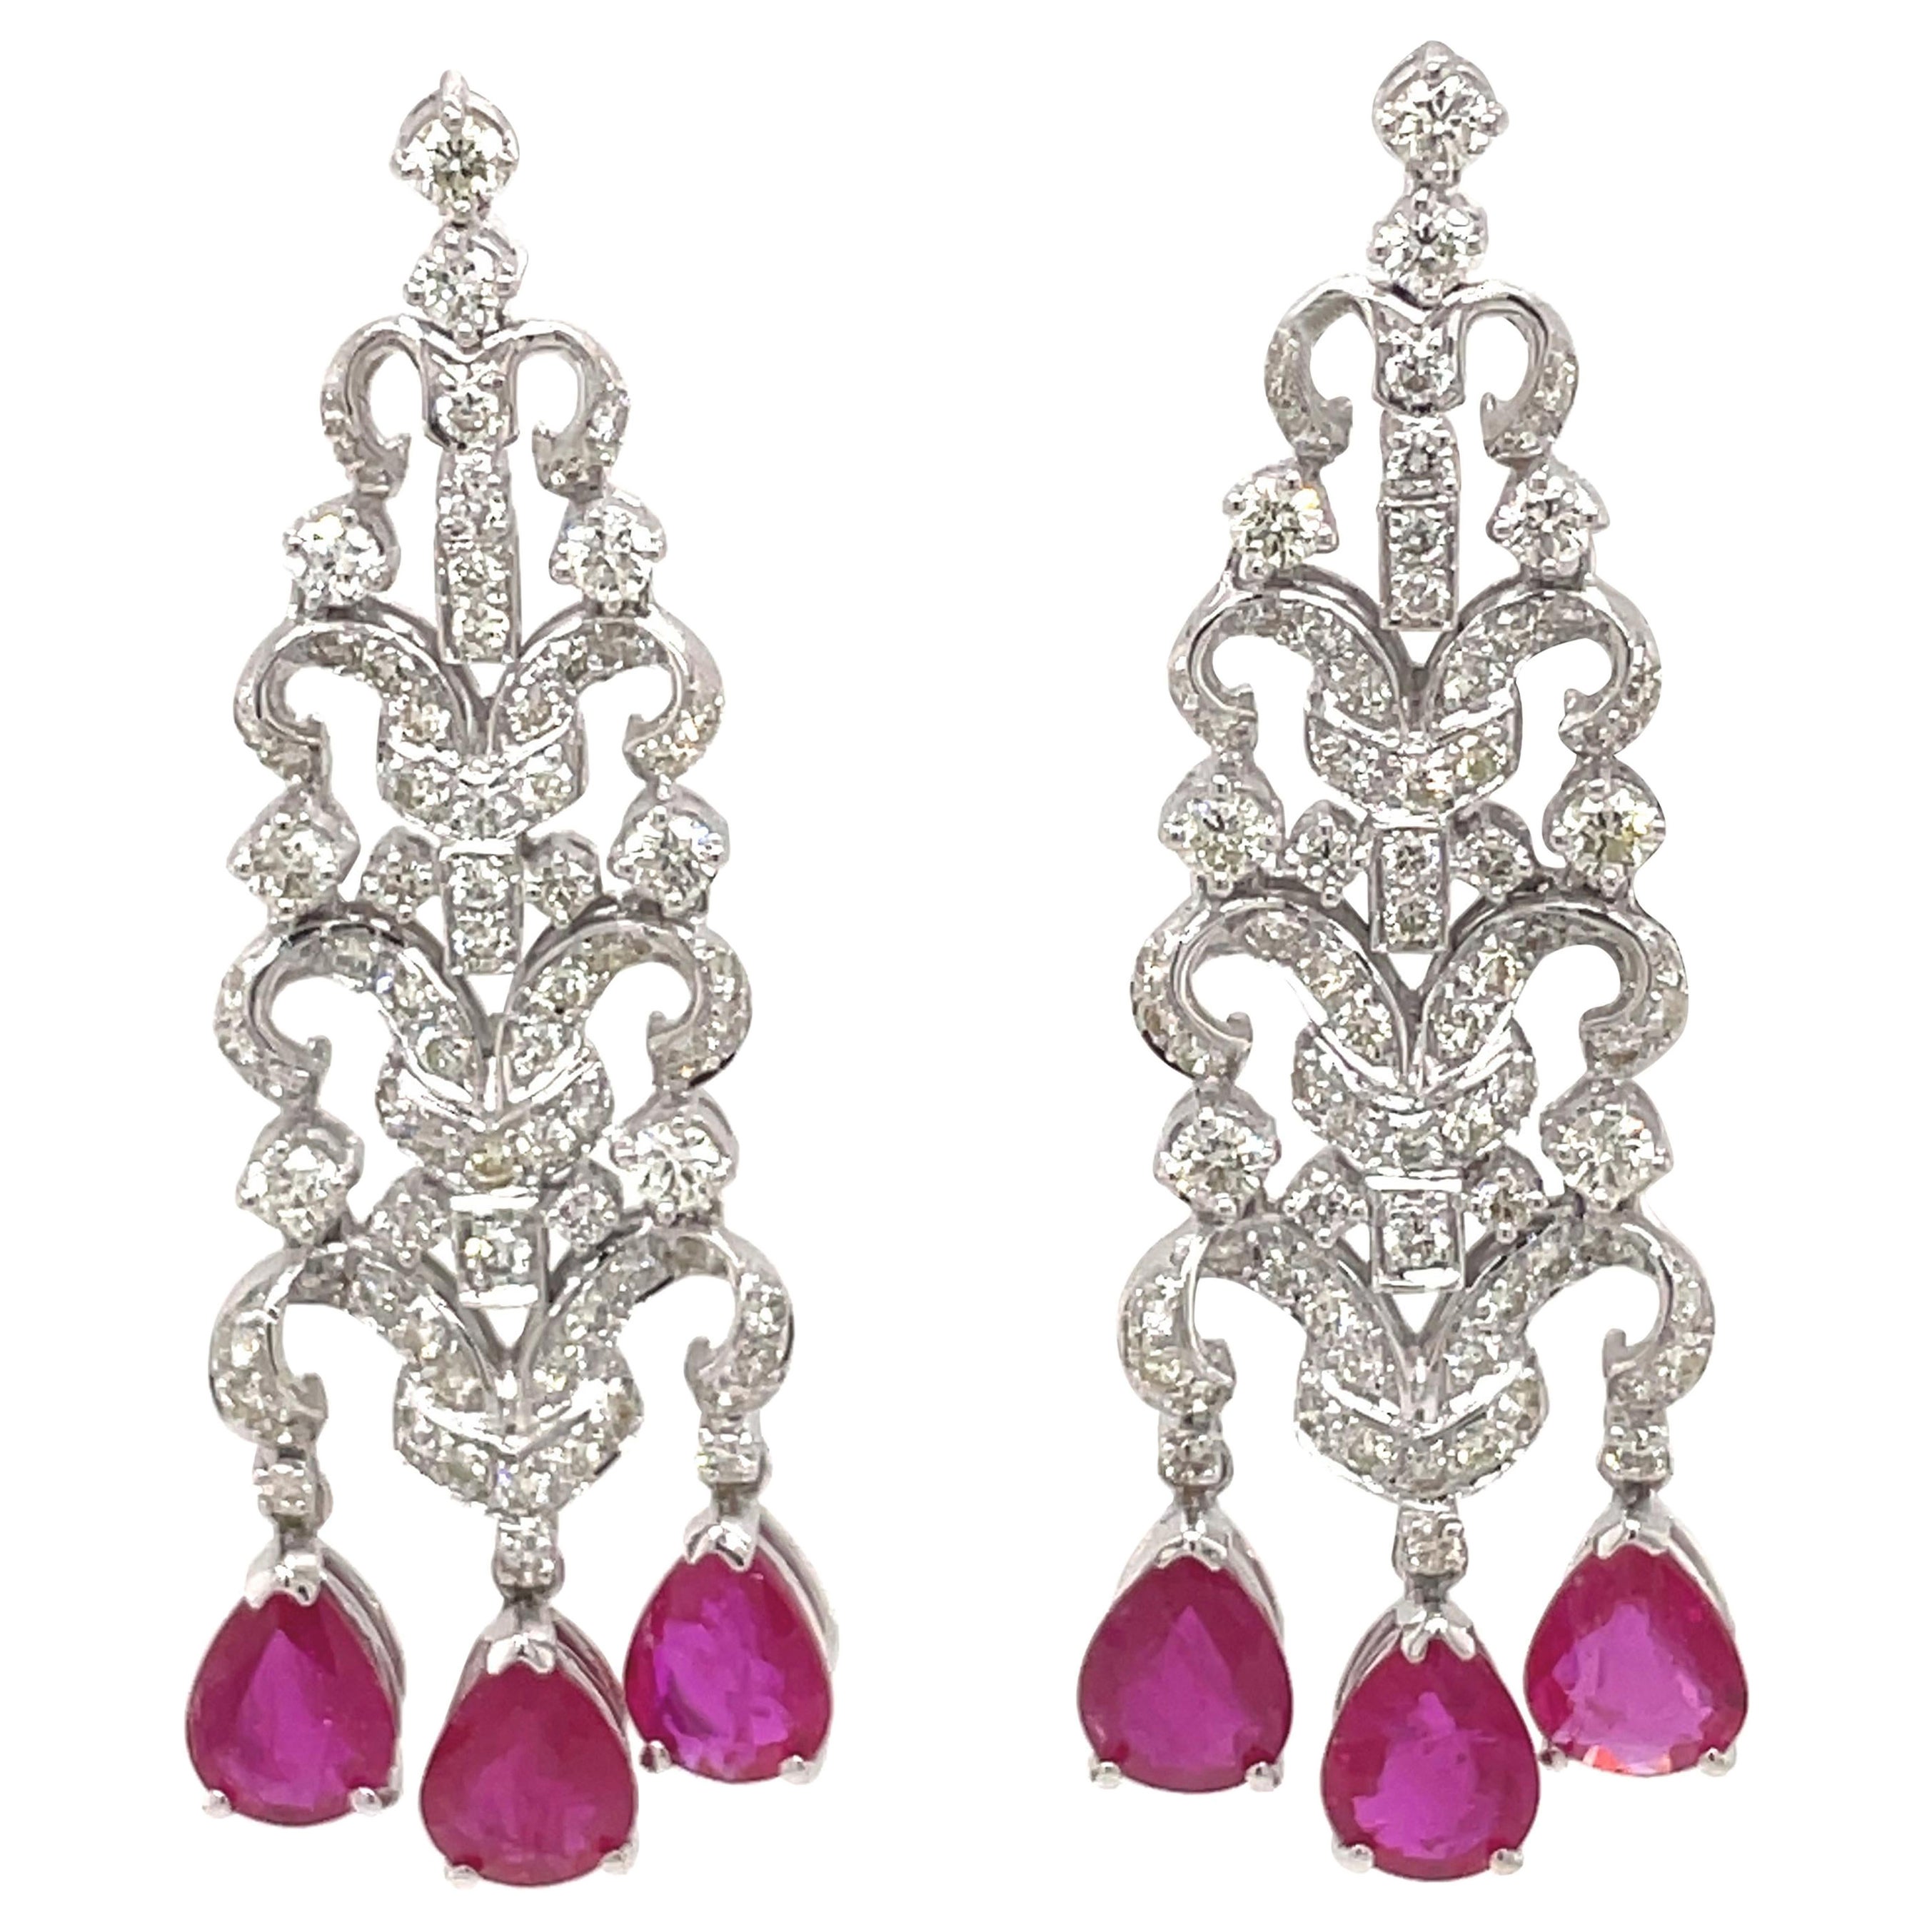 Edwardian Style 7.12ct Ruby with Diamond Chandelier Earrings 18k White Gold For Sale